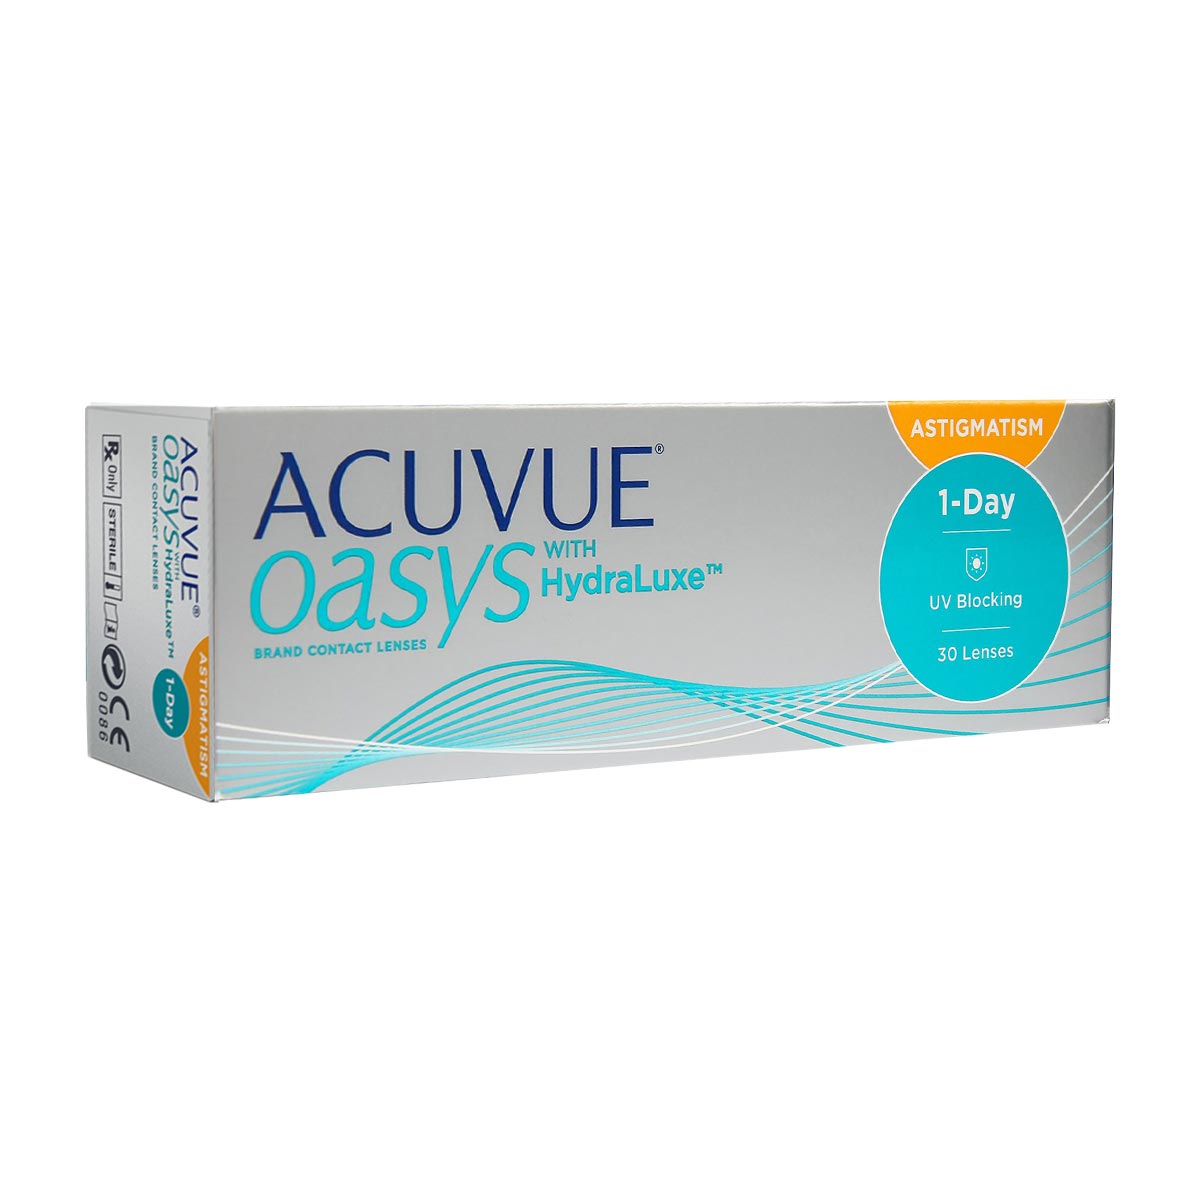 Acuvue Oasys 1 Day for Astigmatism 30 Pack Review